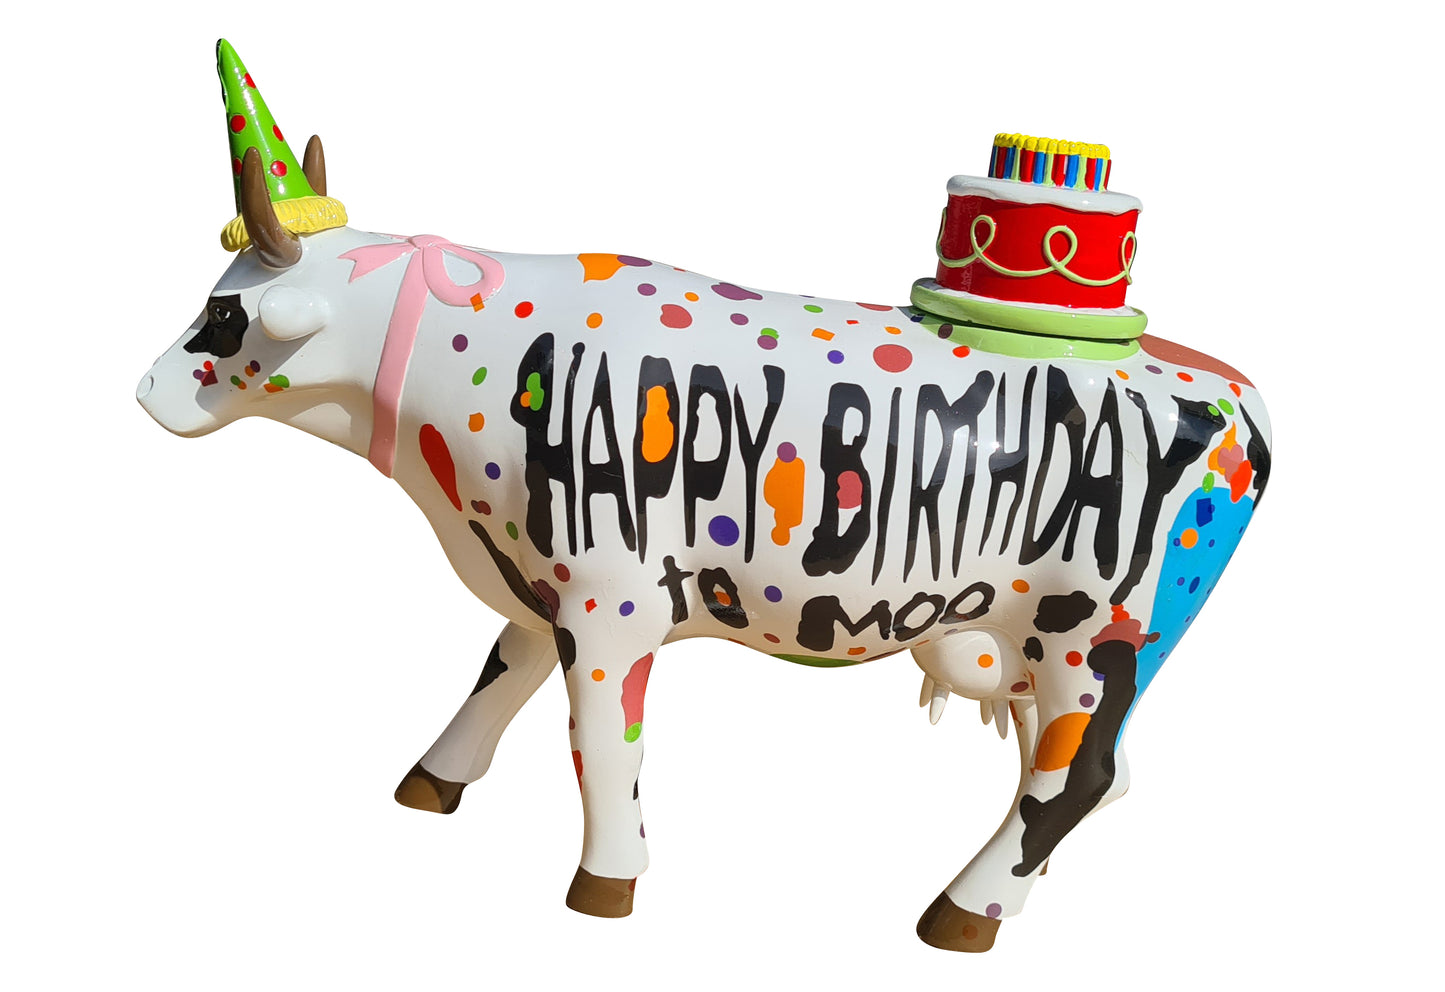 Cow Parade "Happy Birthday" cow statue, length 30.5 centimeters